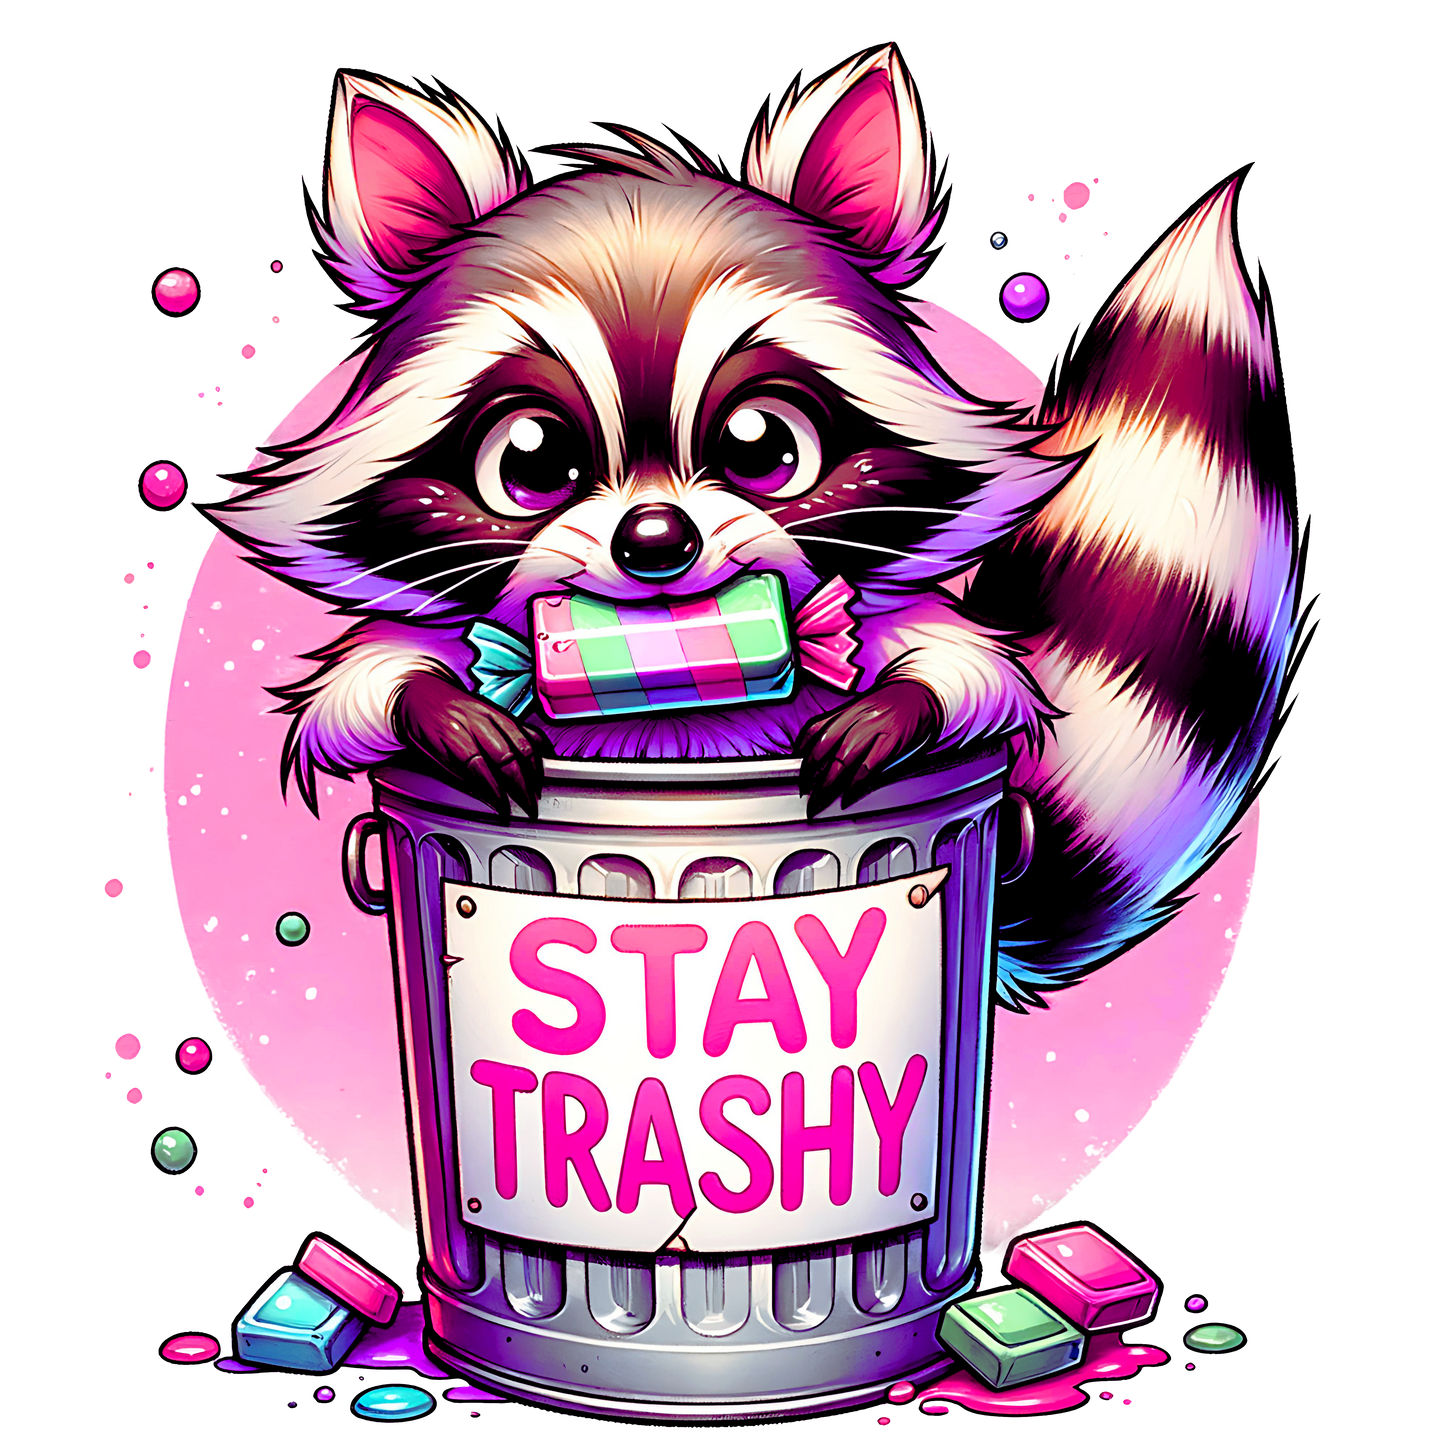 STAY TRASHY WITH CAN